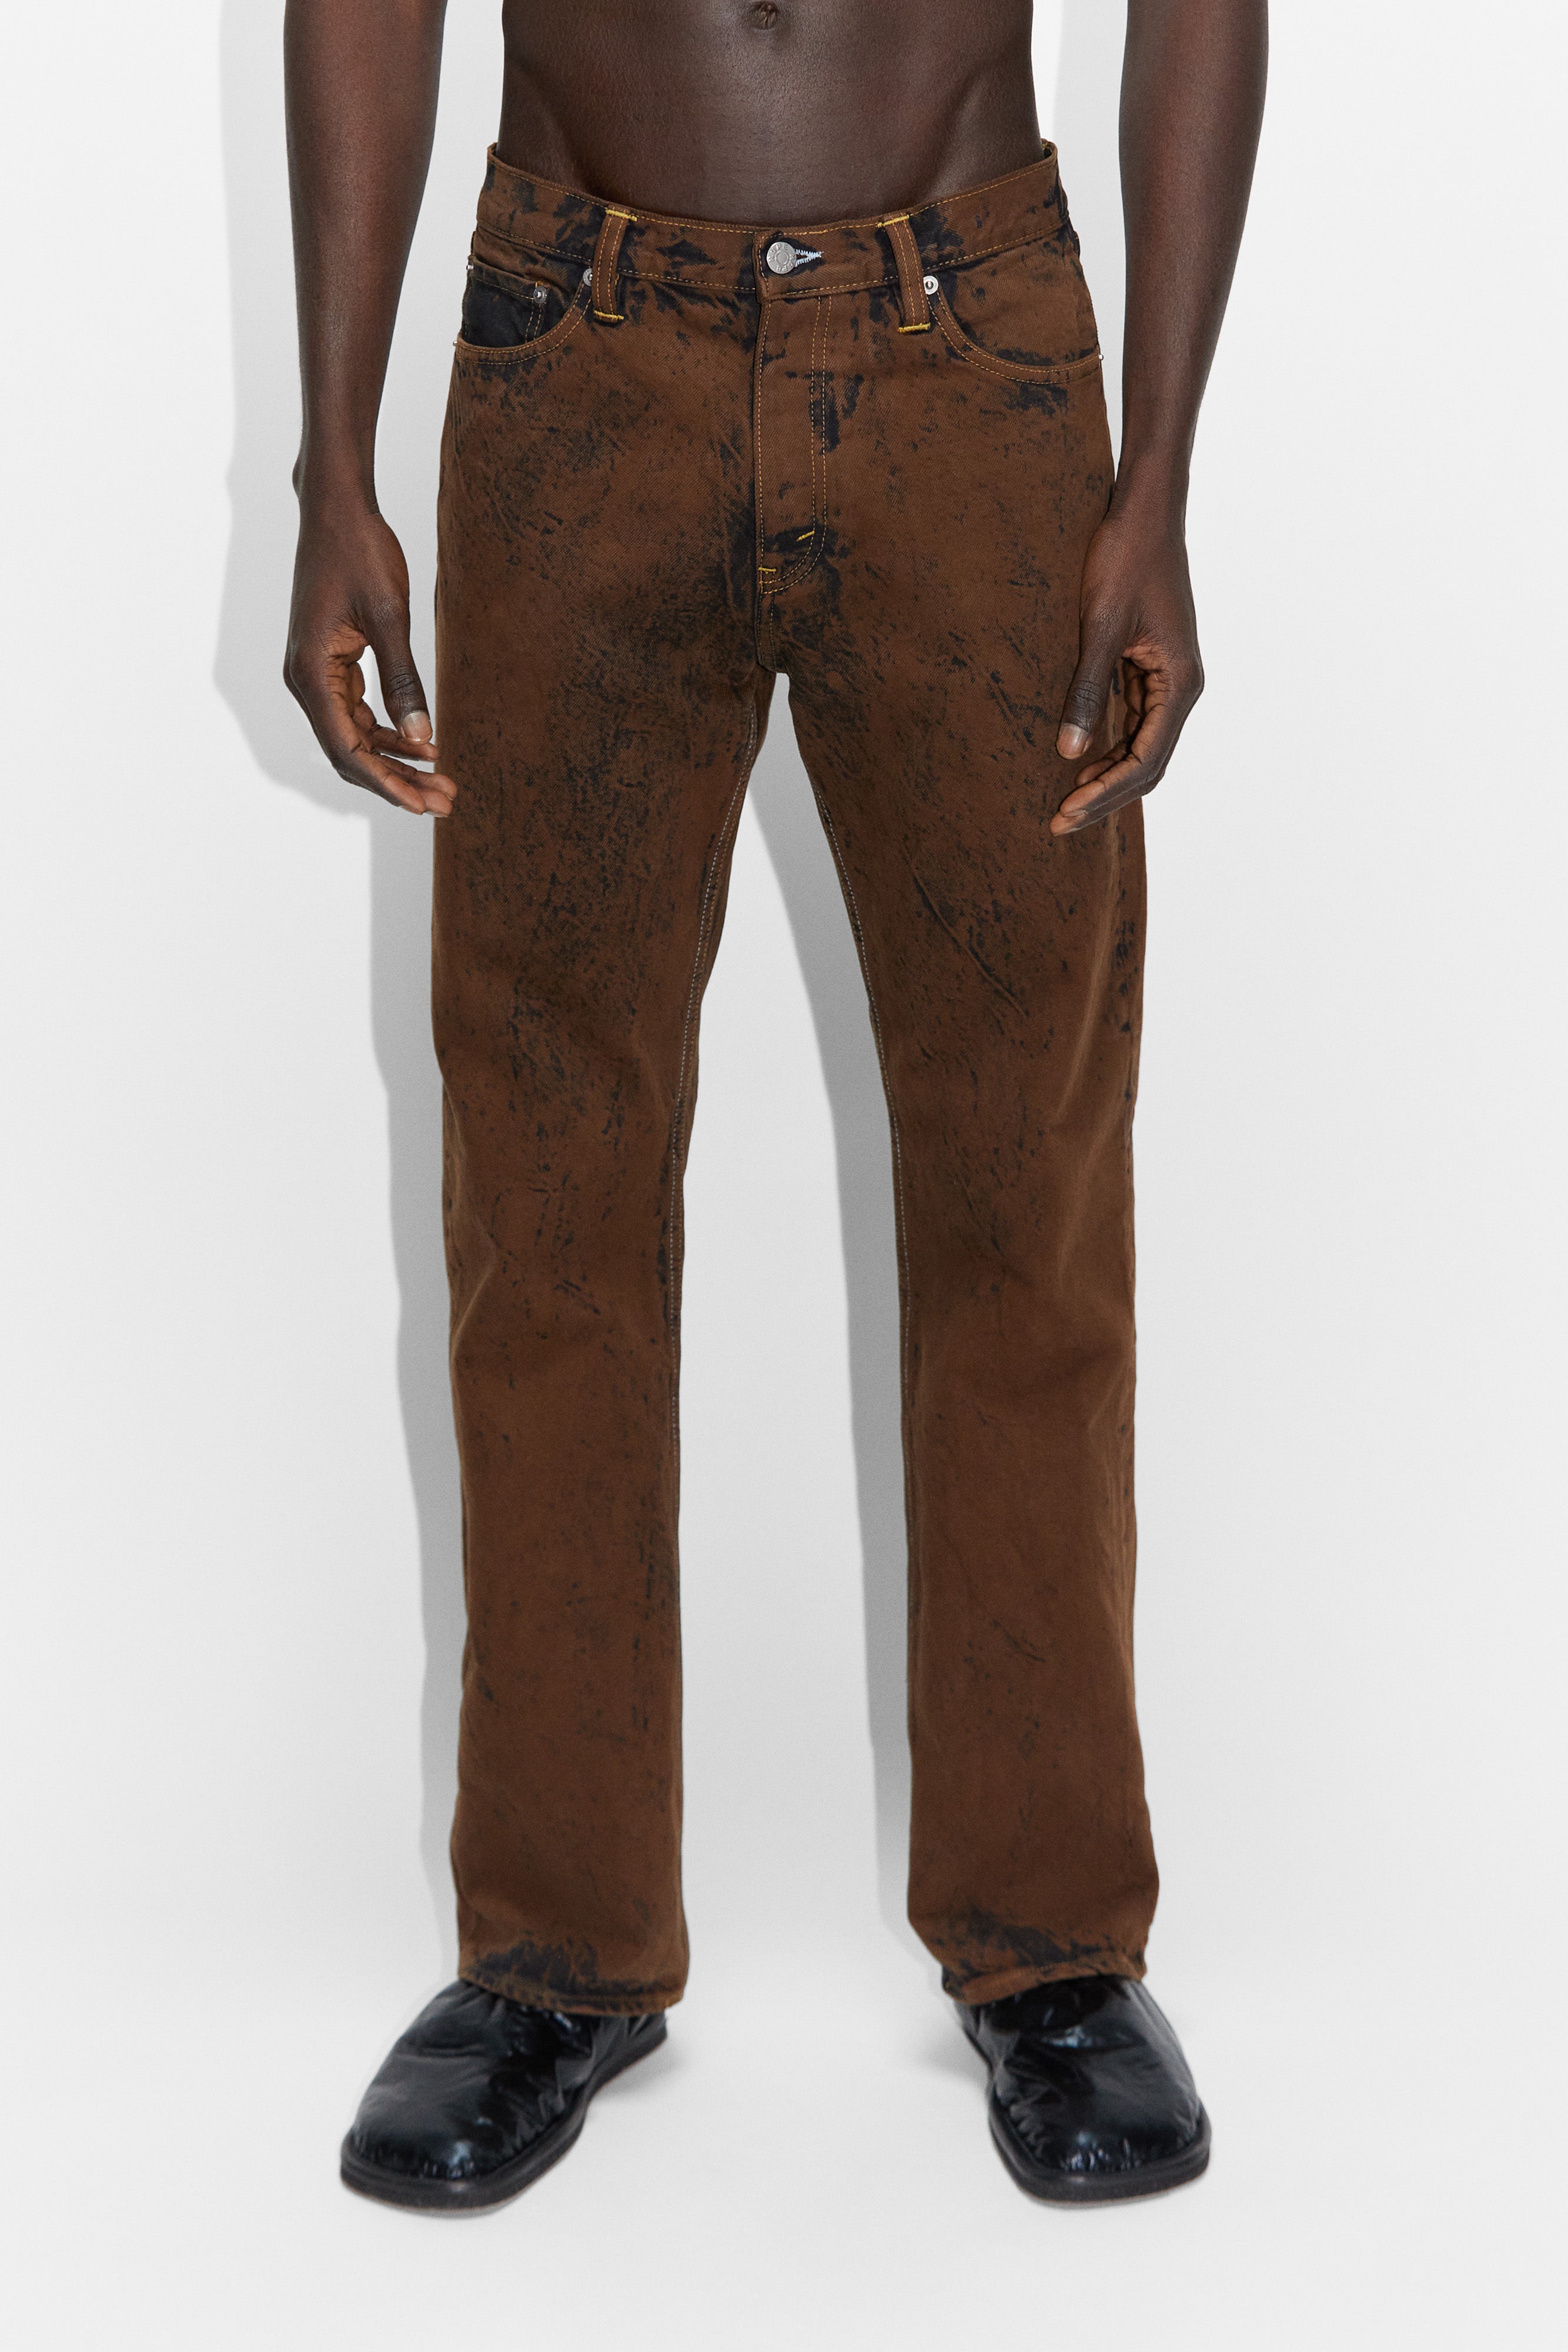 Acid STHLM Jeans HOPE Rush in – Bootcut Relaxed - Brown